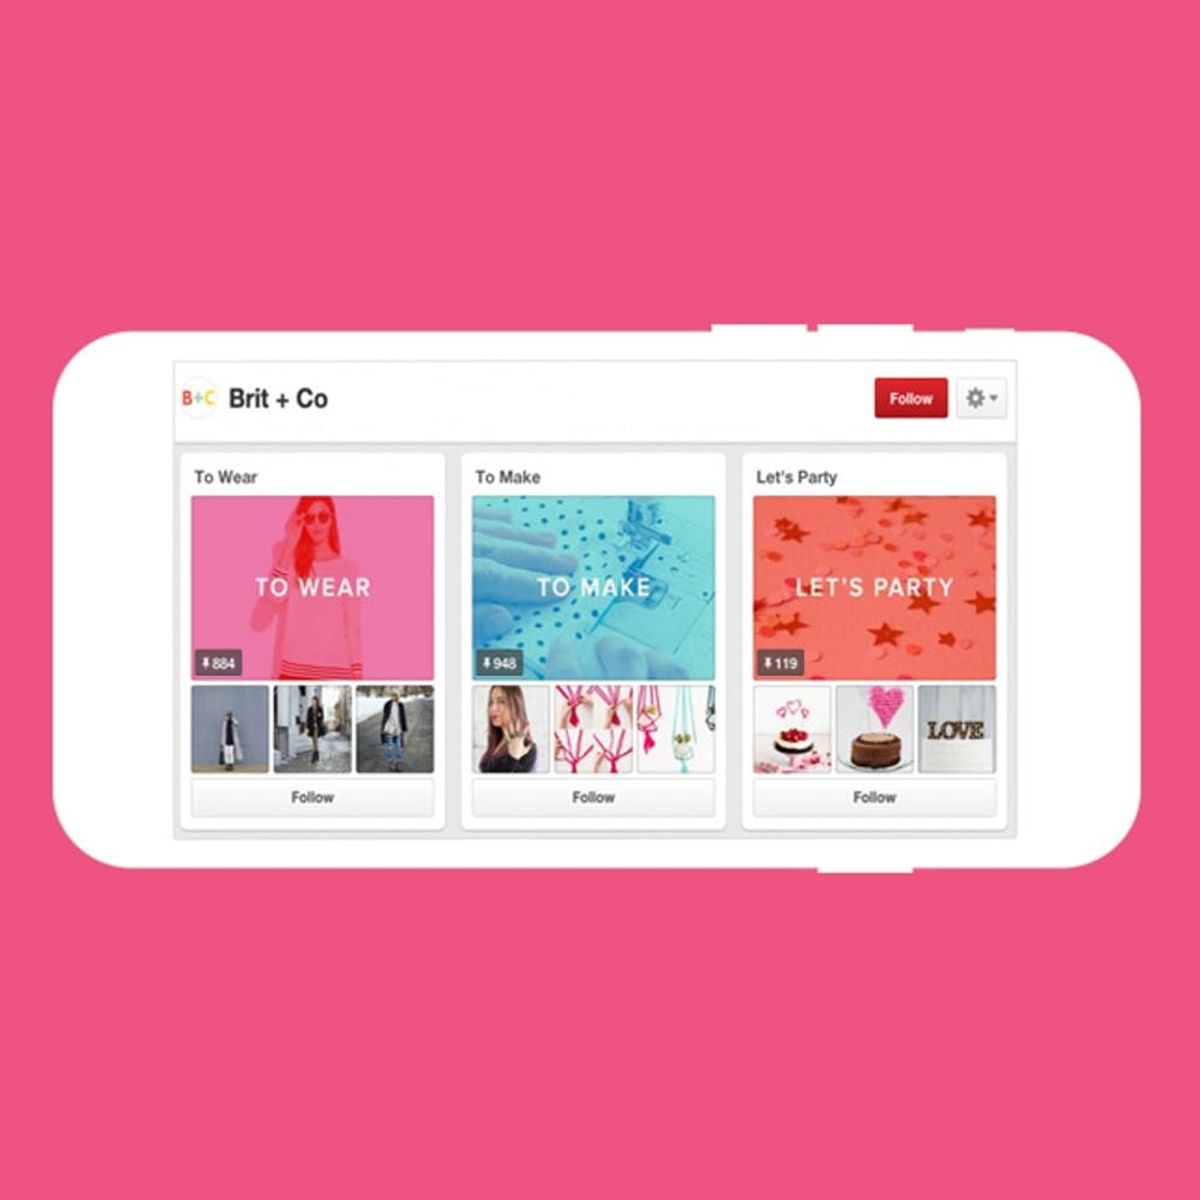 Pinterest’s Latest Update Is Going to Have You Pinning Like Never Before